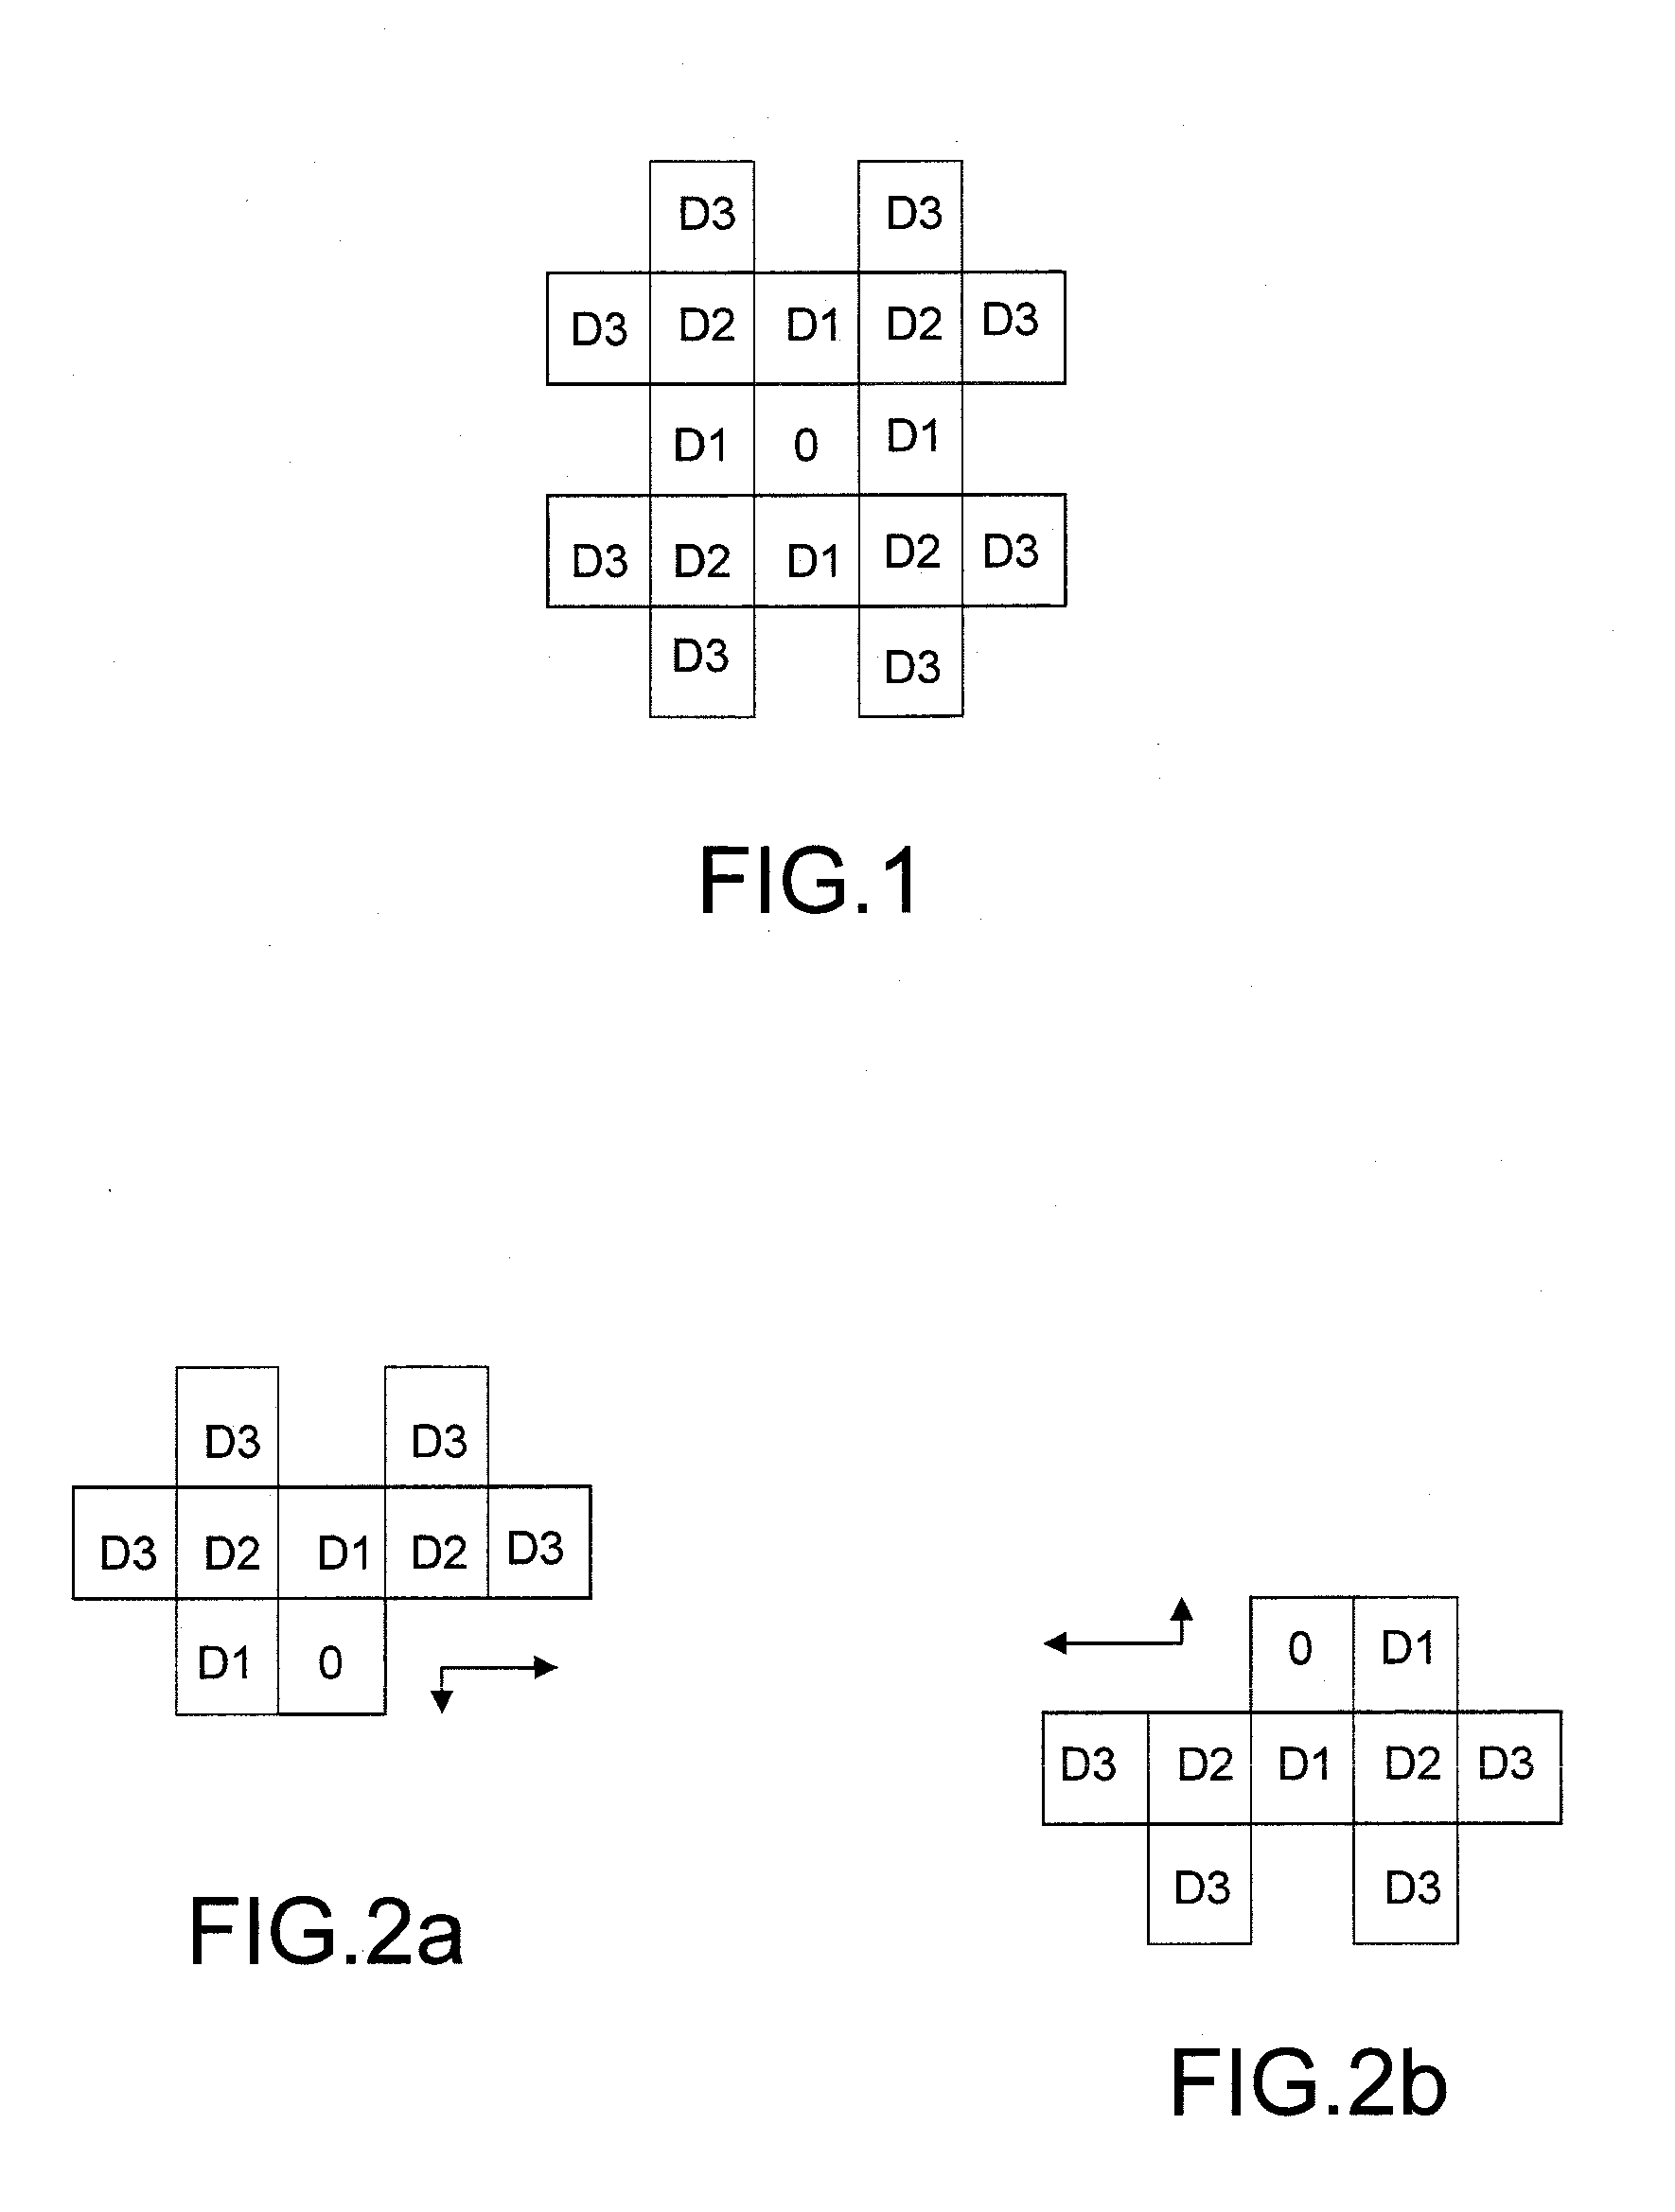 Method for Determining the Horizontal Profile of a Flight Plan Complying with a Prescribed Vertical Flight Profile